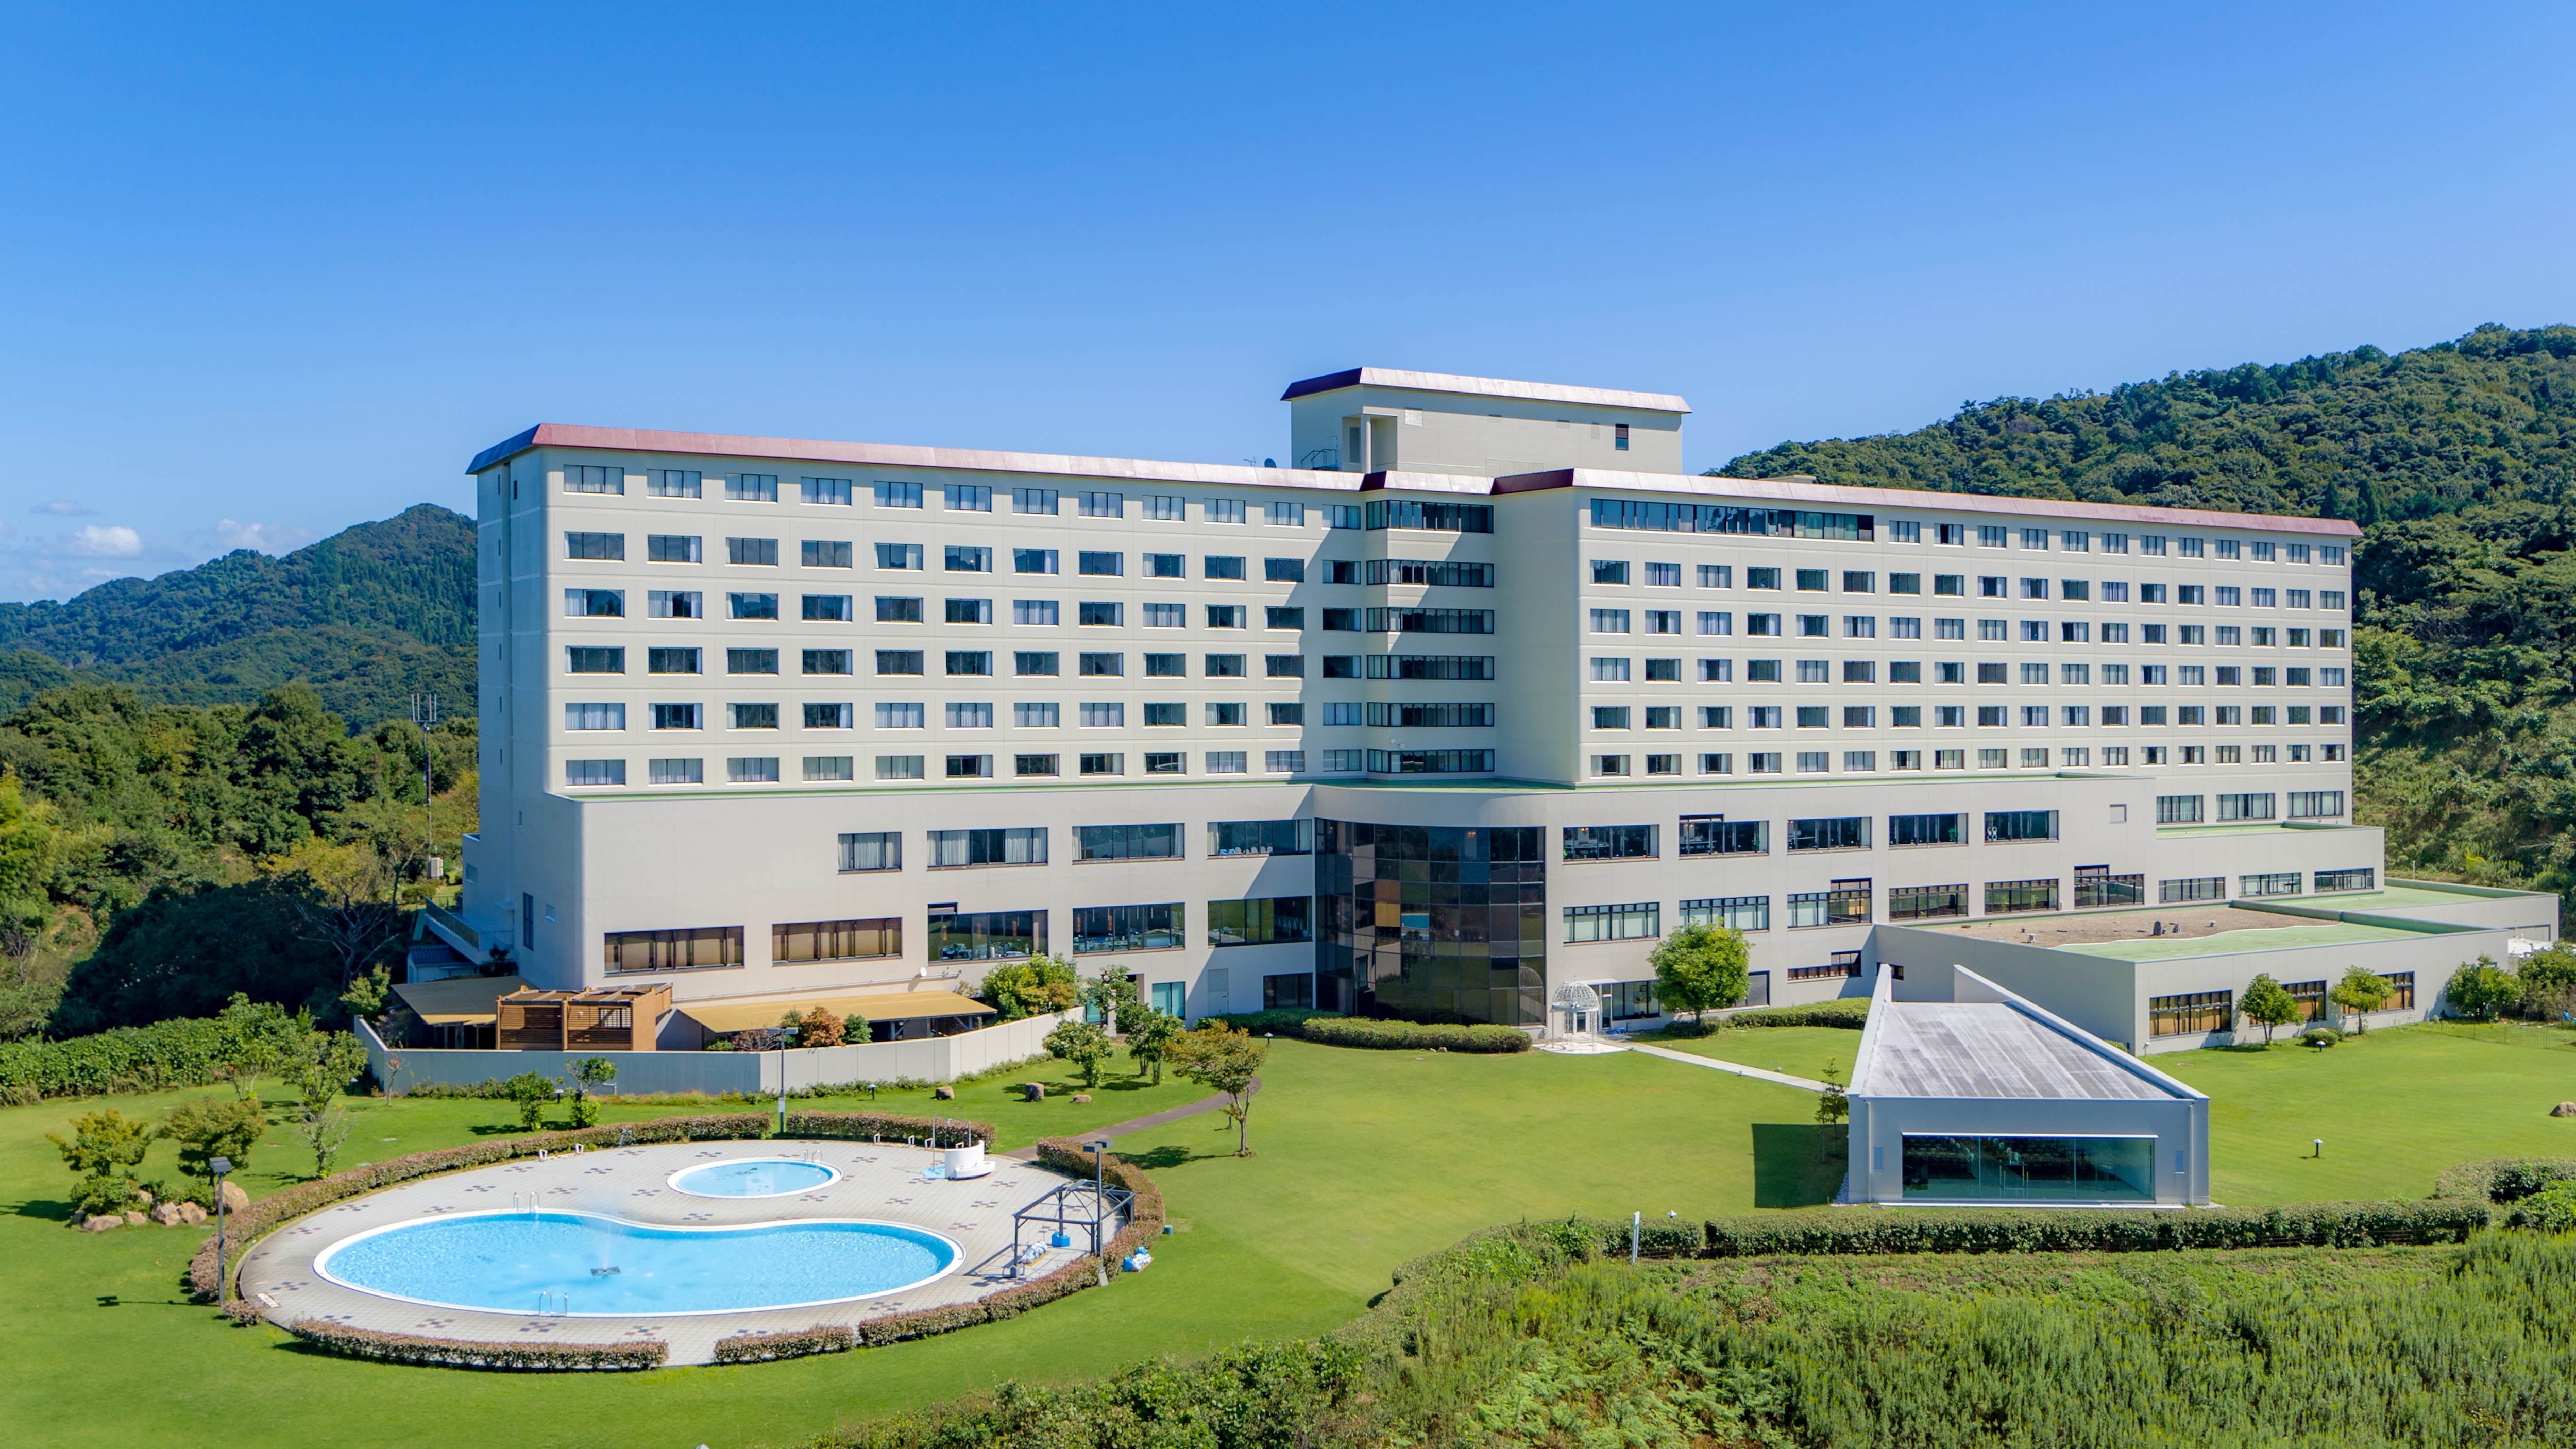 Exterior / Hotel exterior example. A large resort located on a hill overlooking Amanohashidate and Miyazu Bay. The beautiful blue sea is a treasure of Tango.